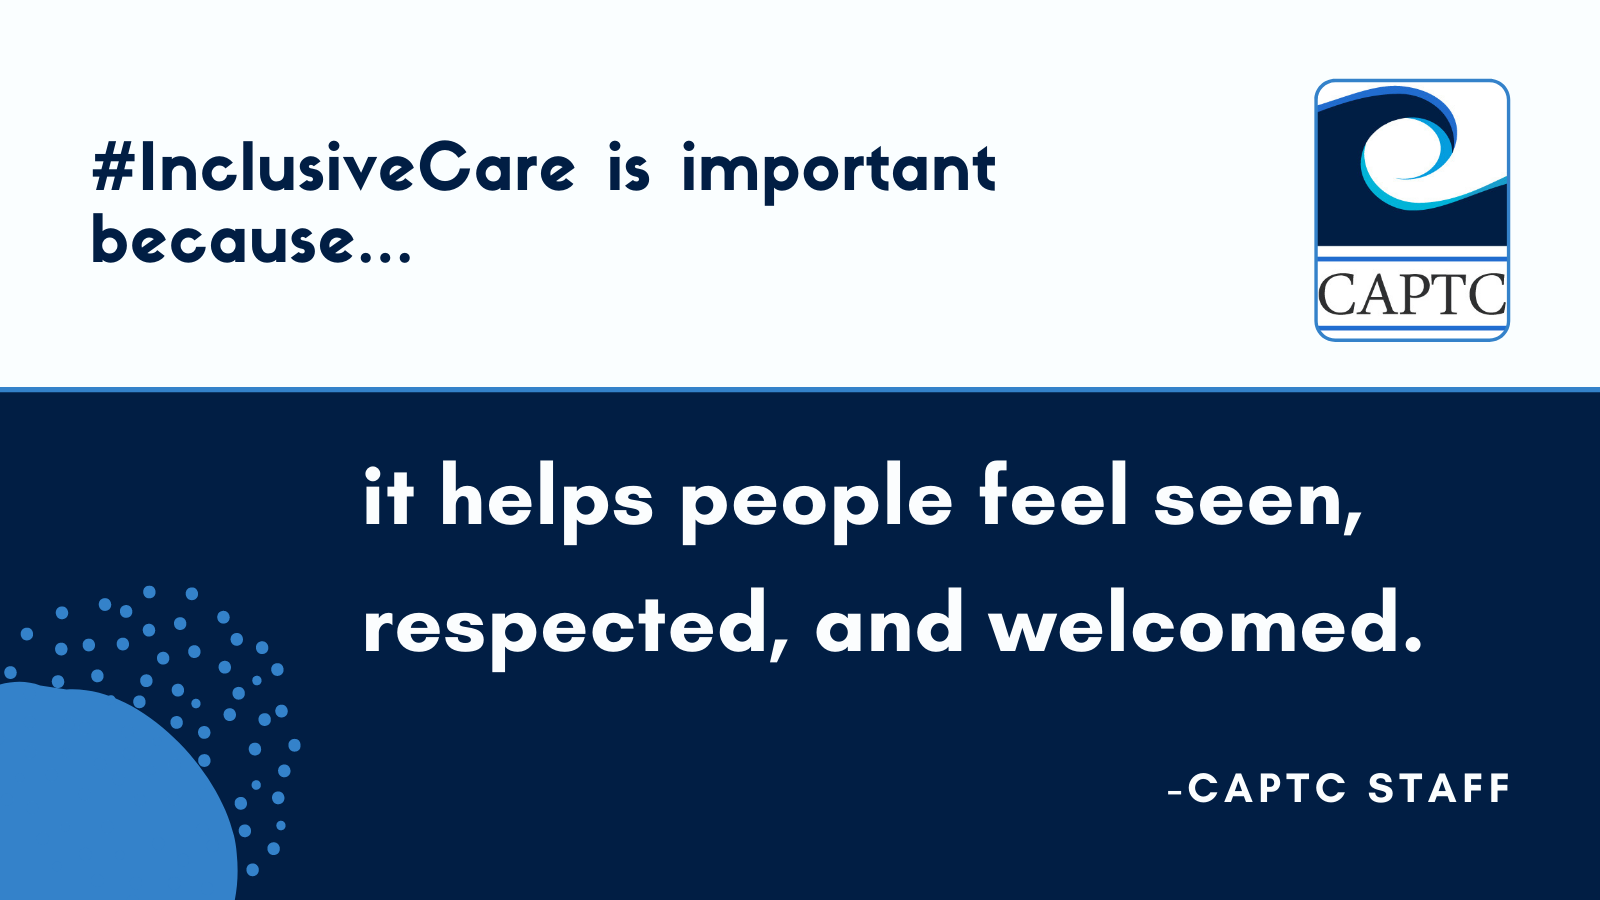 #inclusivecare is important because it helps people feel seen, respected, and welcomed. CAPTC Staff